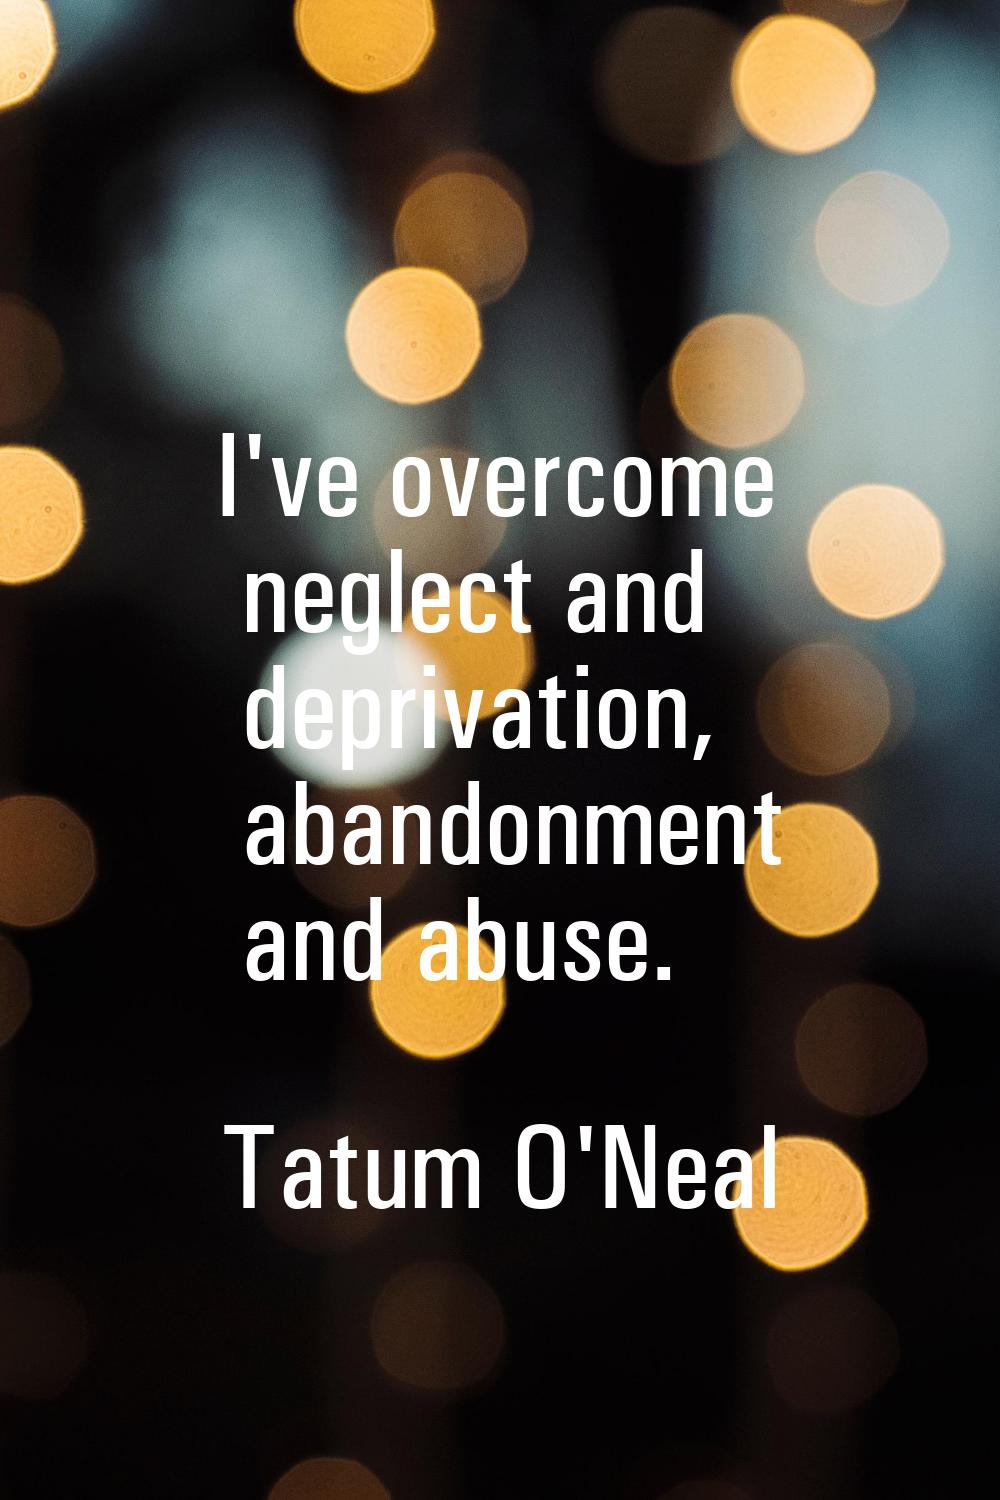 I've overcome neglect and deprivation, abandonment and abuse.